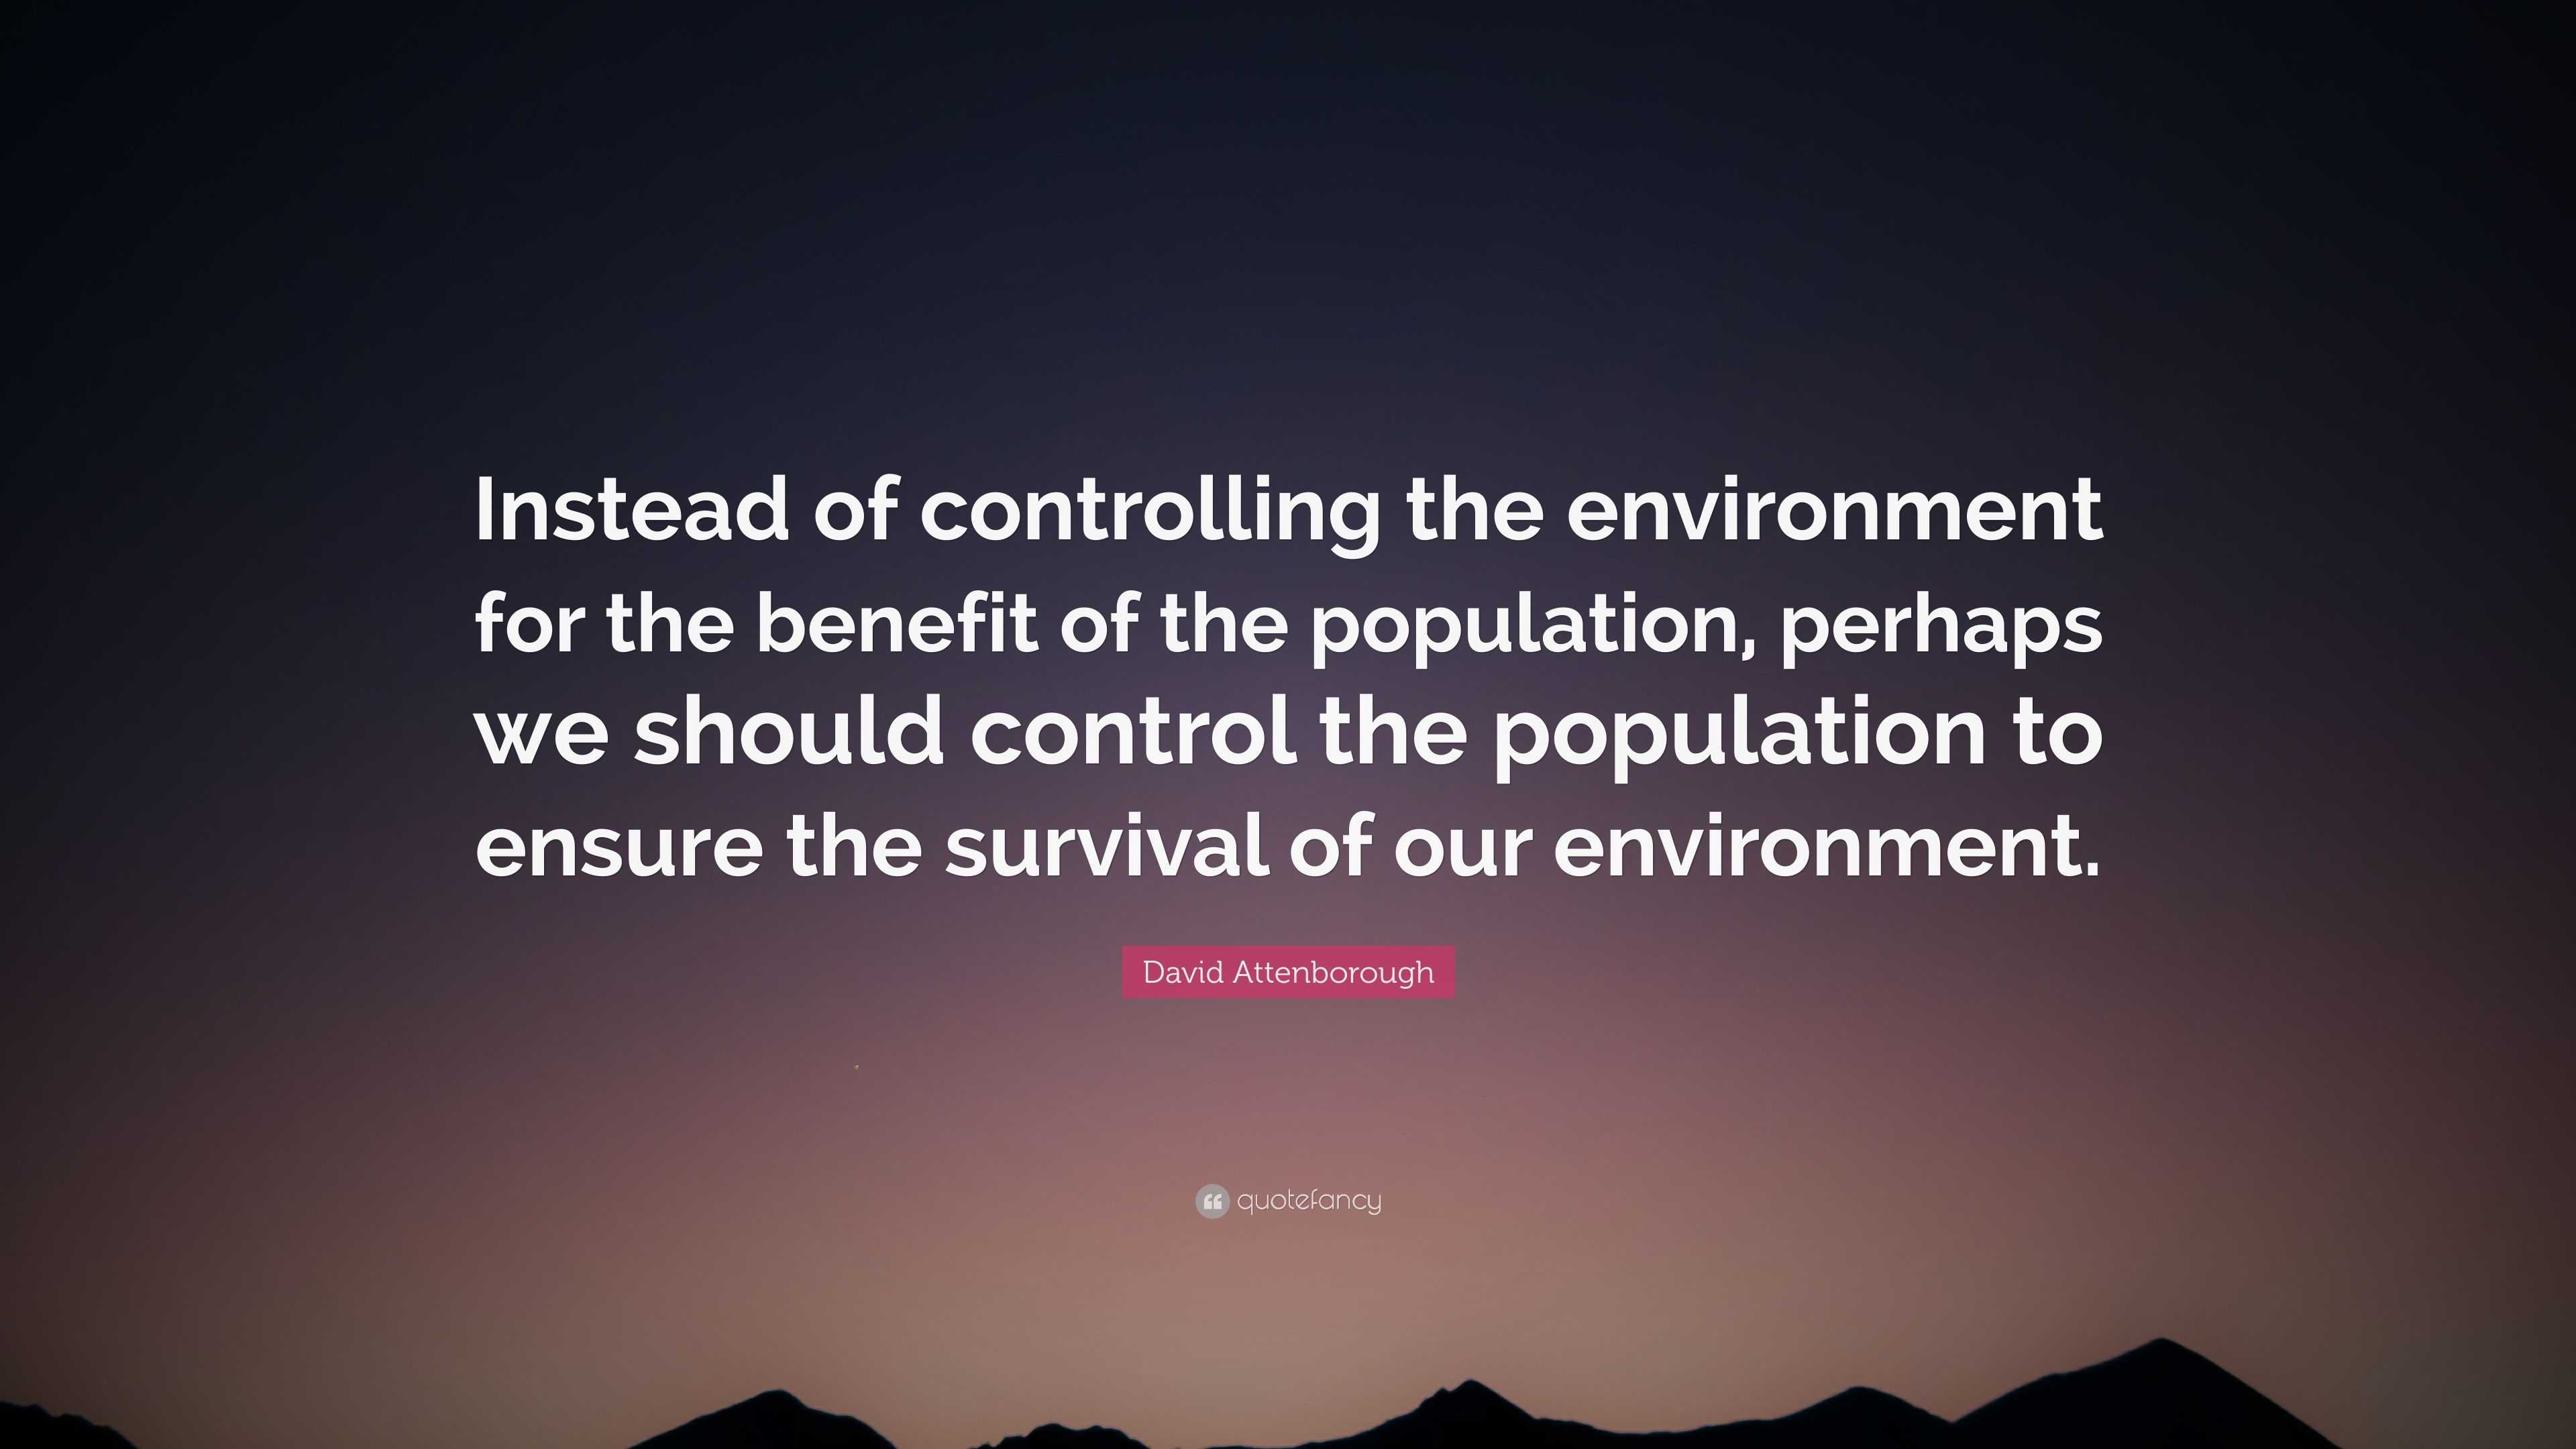 2113310 David Attenborough Quote Instead of controlling the environment